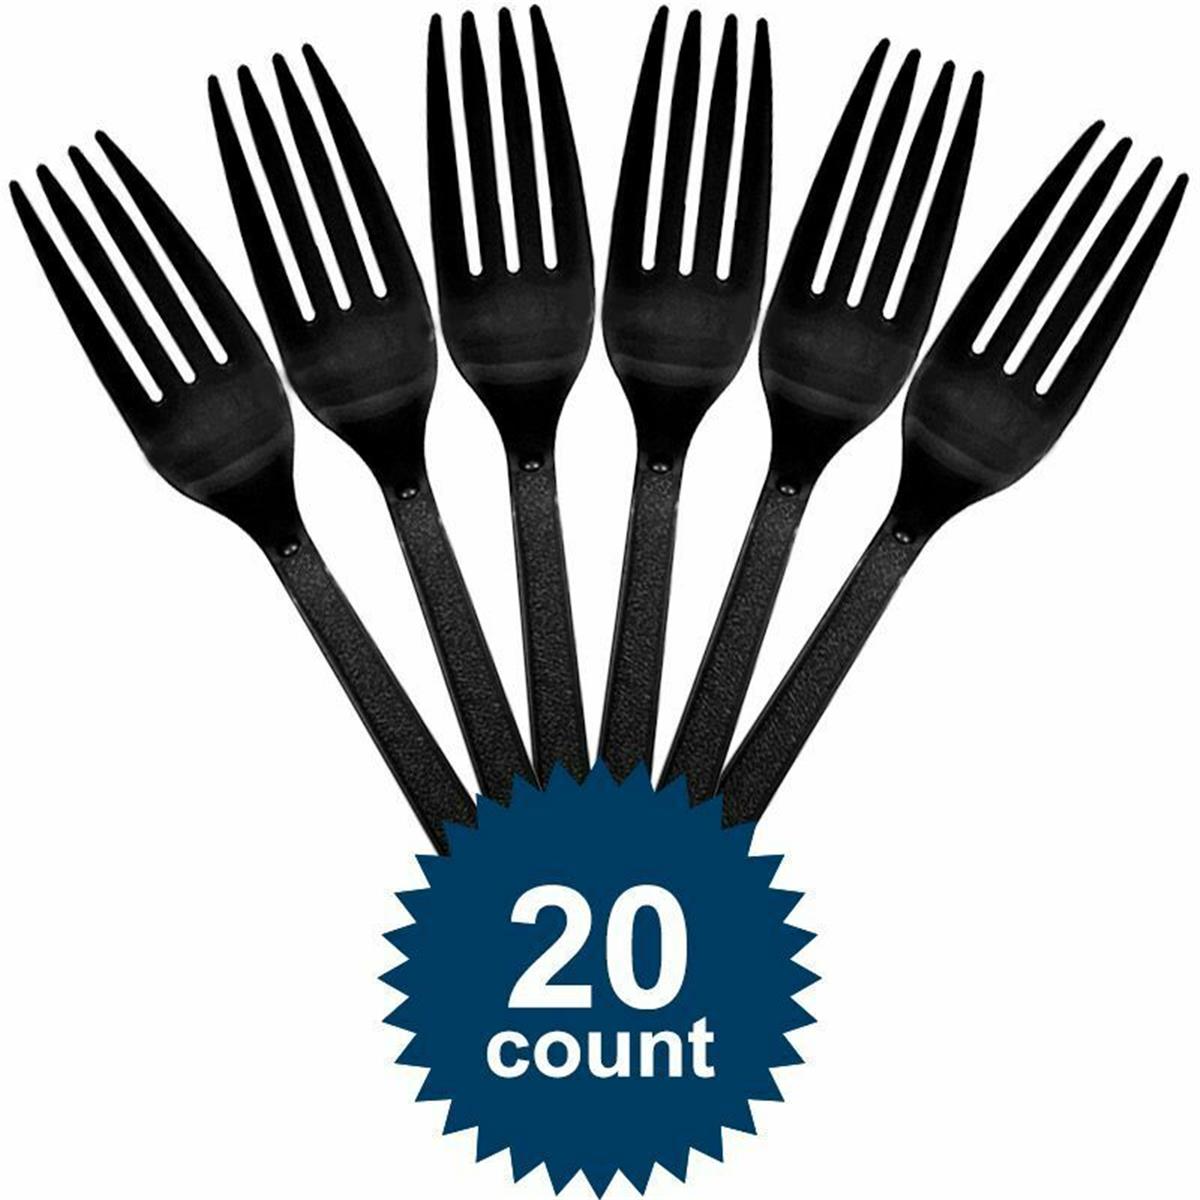 Picture of Amscan 261059 Heavy Weight Plastic Fork - 20 Count